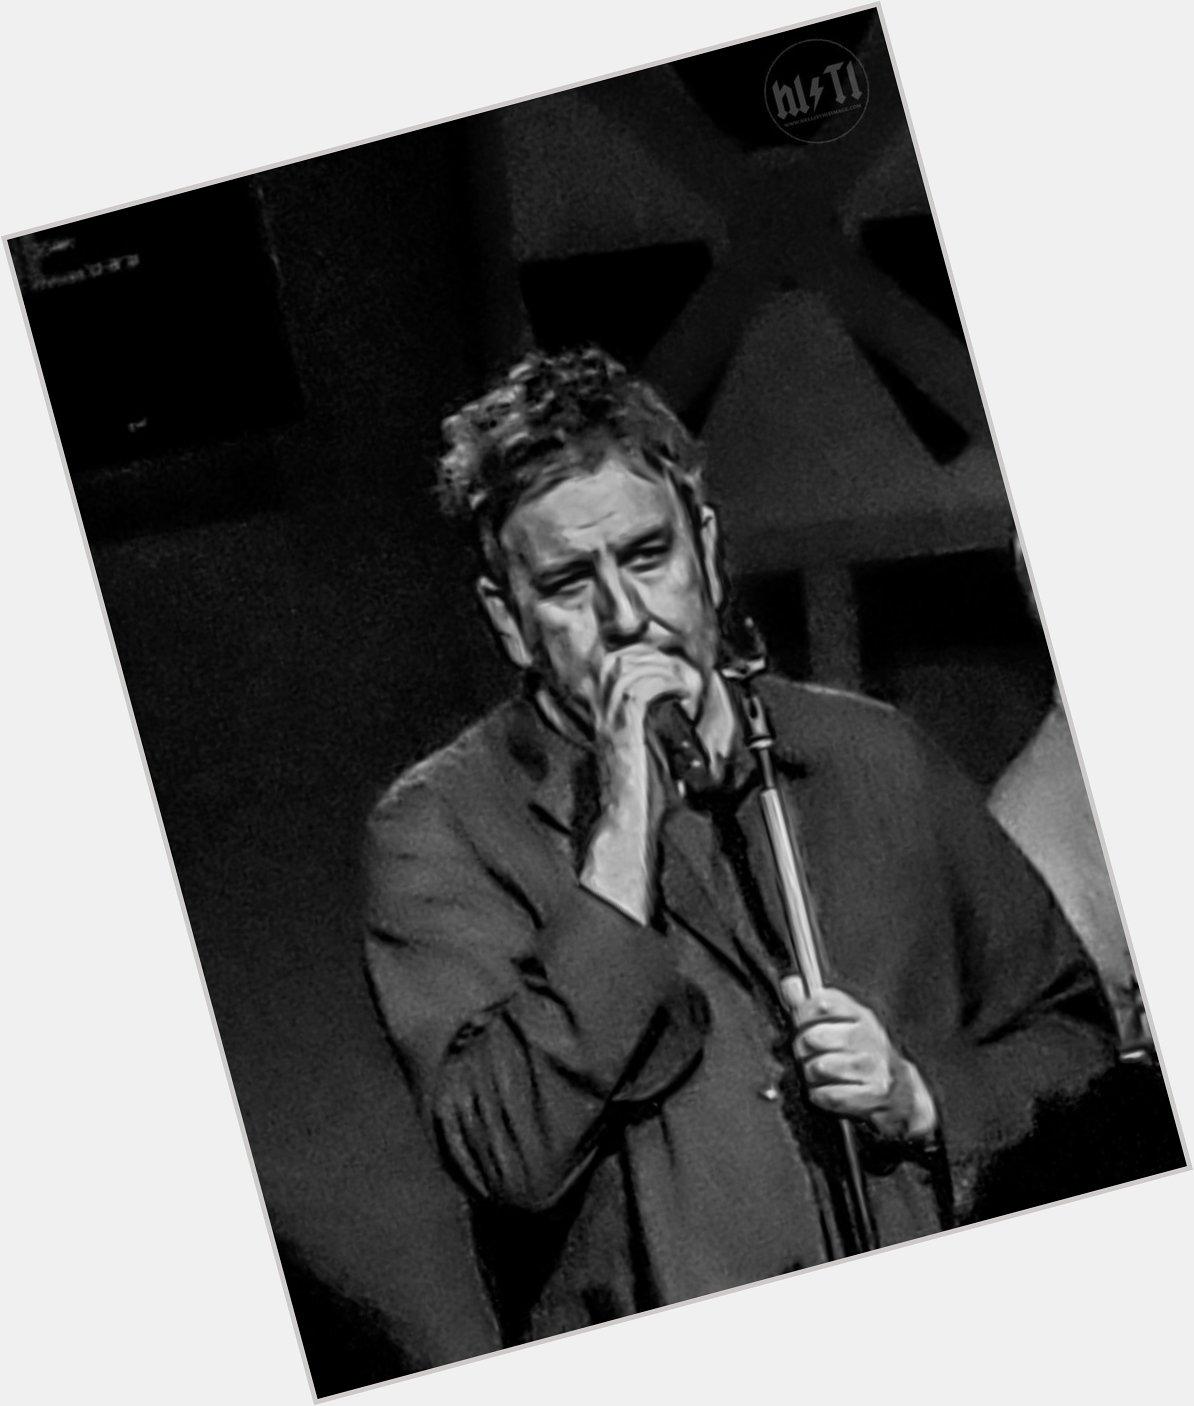 Happy Birthday to Terry Hall of 